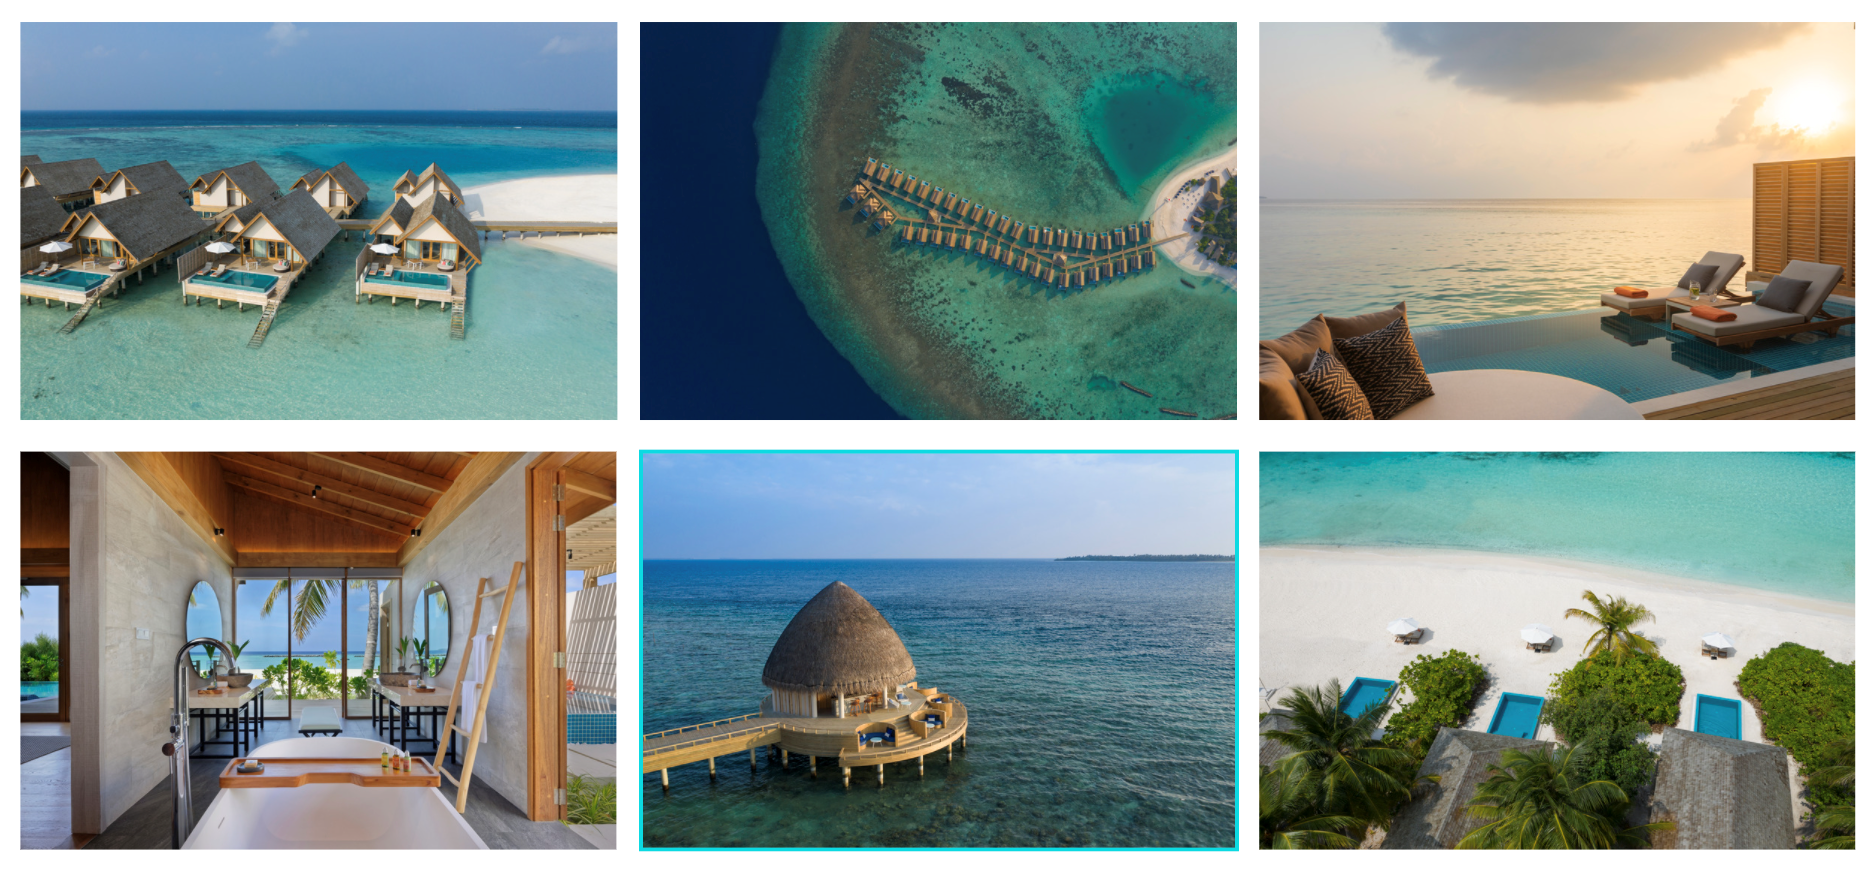 Emerald Collection Expands Its Luxury Portfolio in the Maldives With The Acquisition of Faarufushi Resort & Spa in Raa Atoll